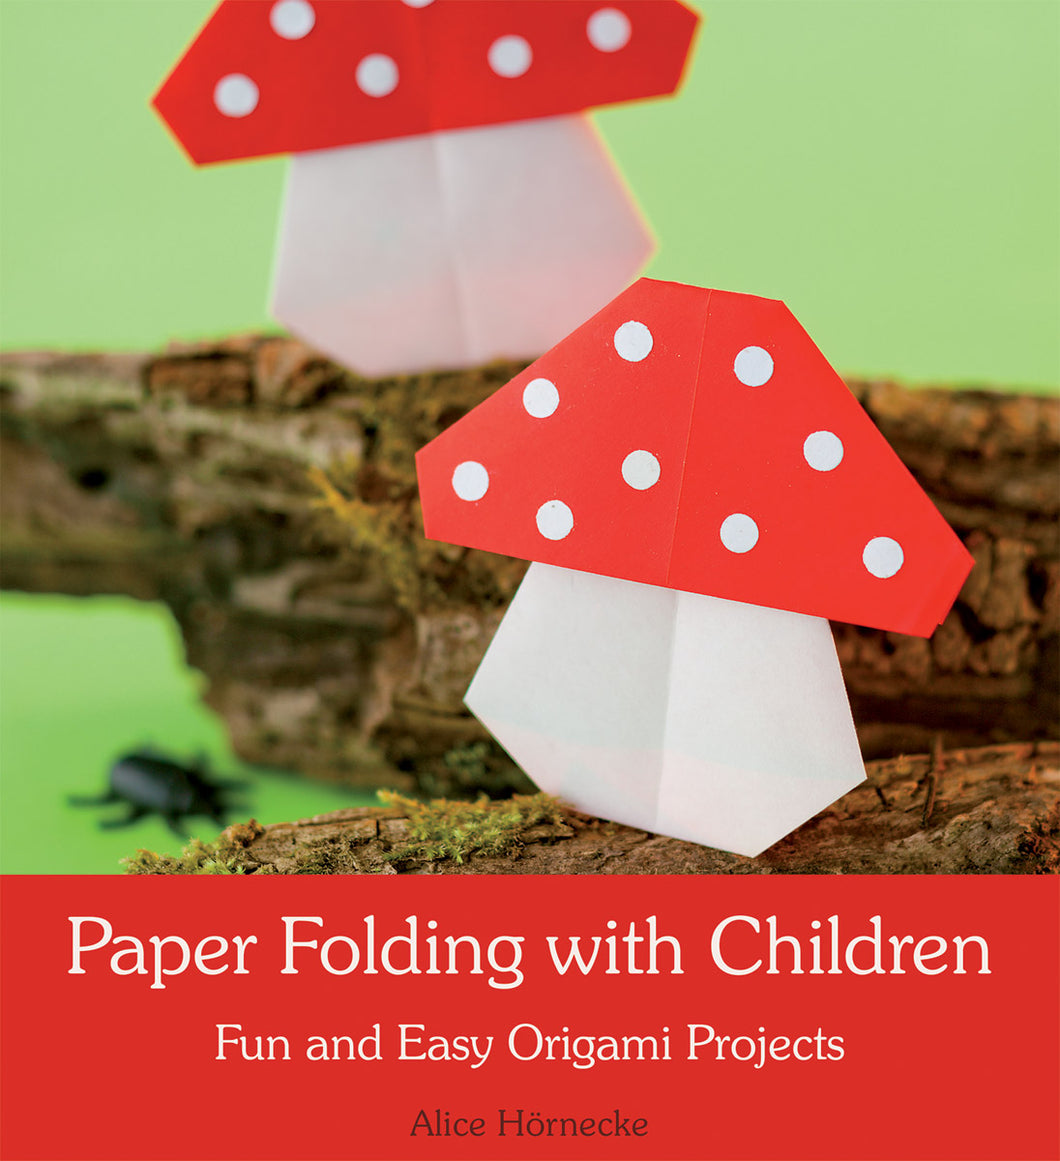 Paper Folding with Children: Fun and Easy Origami Projects by Alice Hörnecke